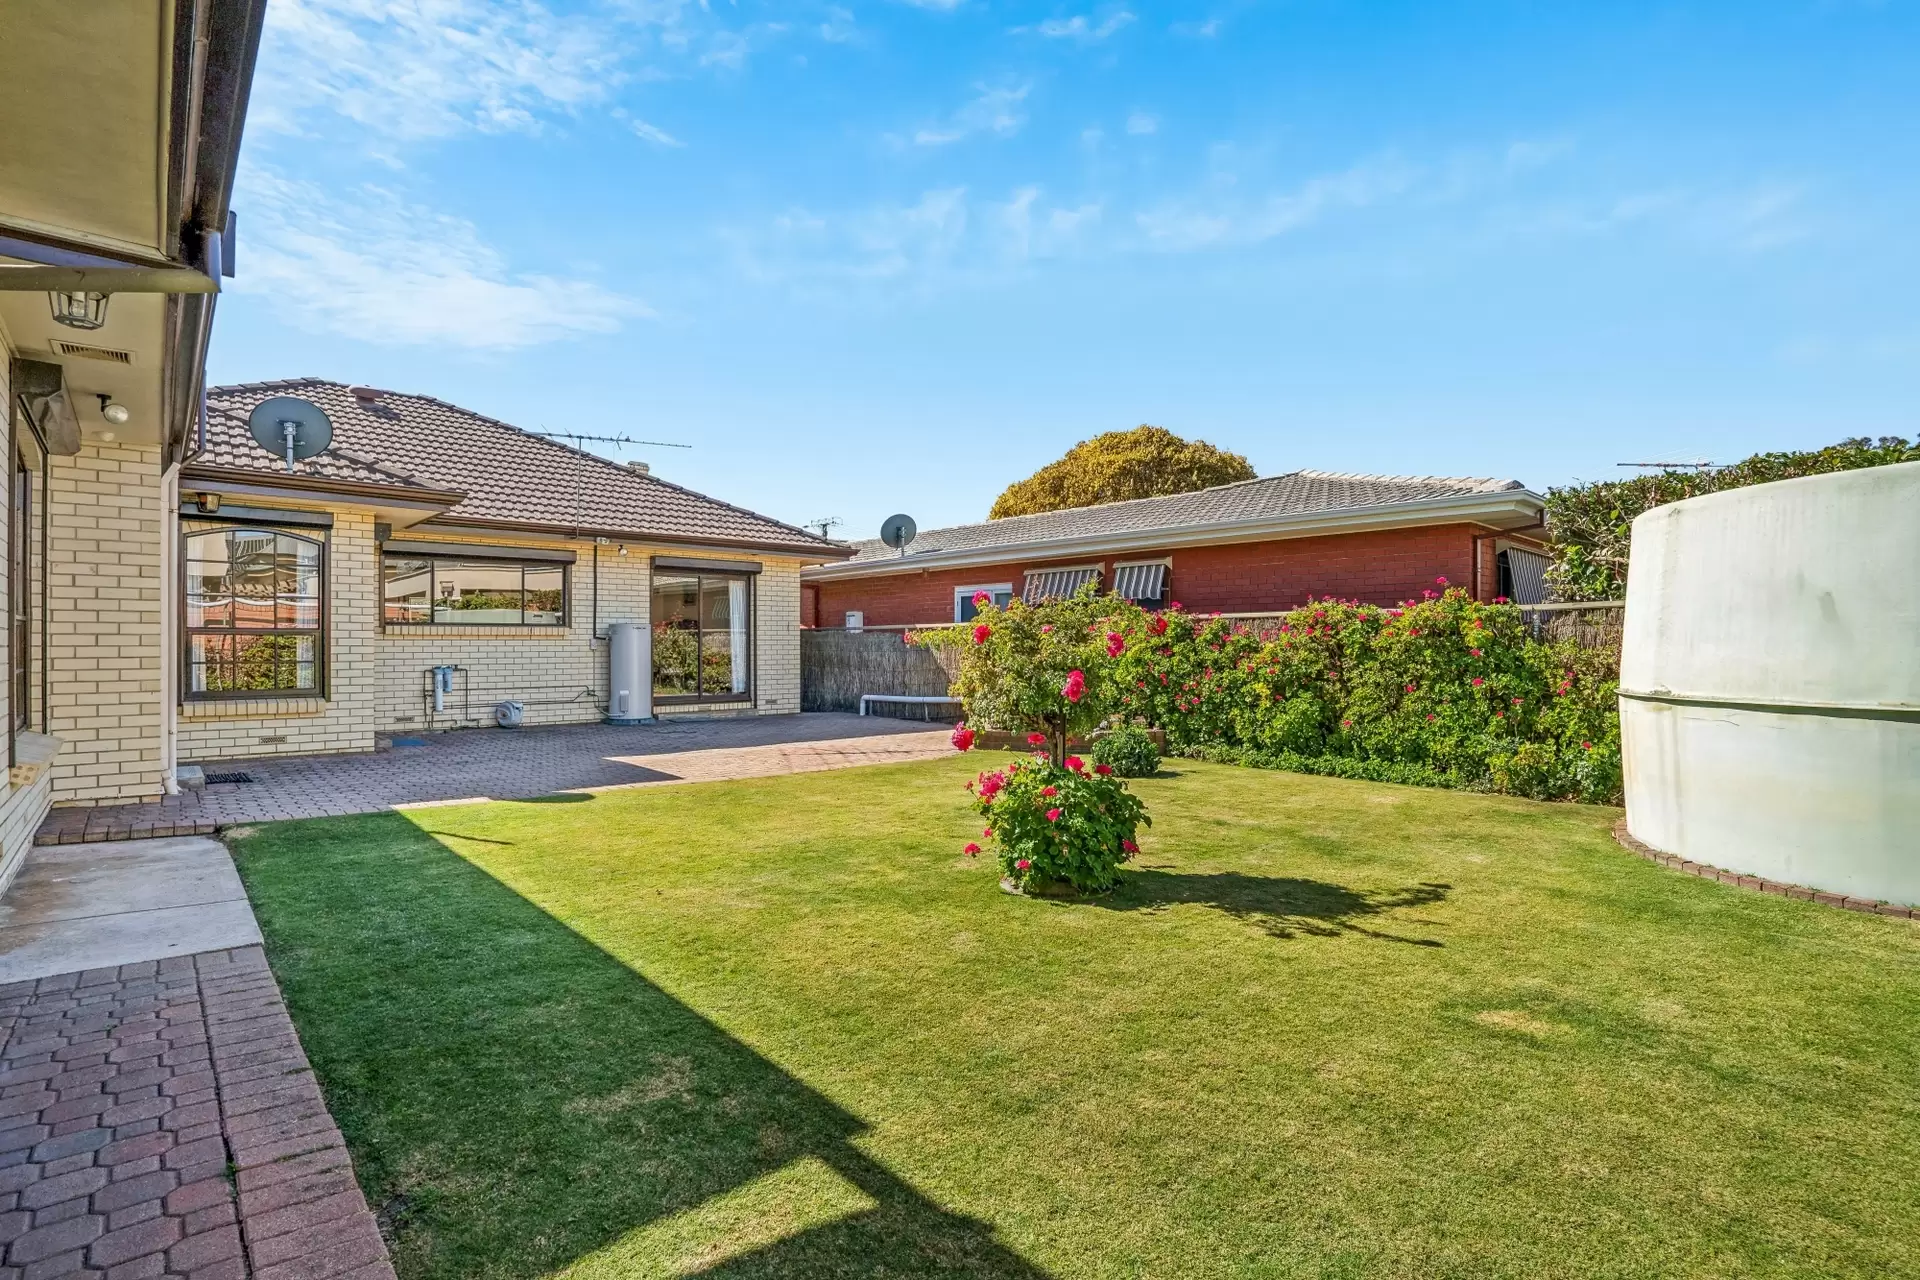 3 Glenfield Court, Medindie Sold by Booth Real Estate - image 1